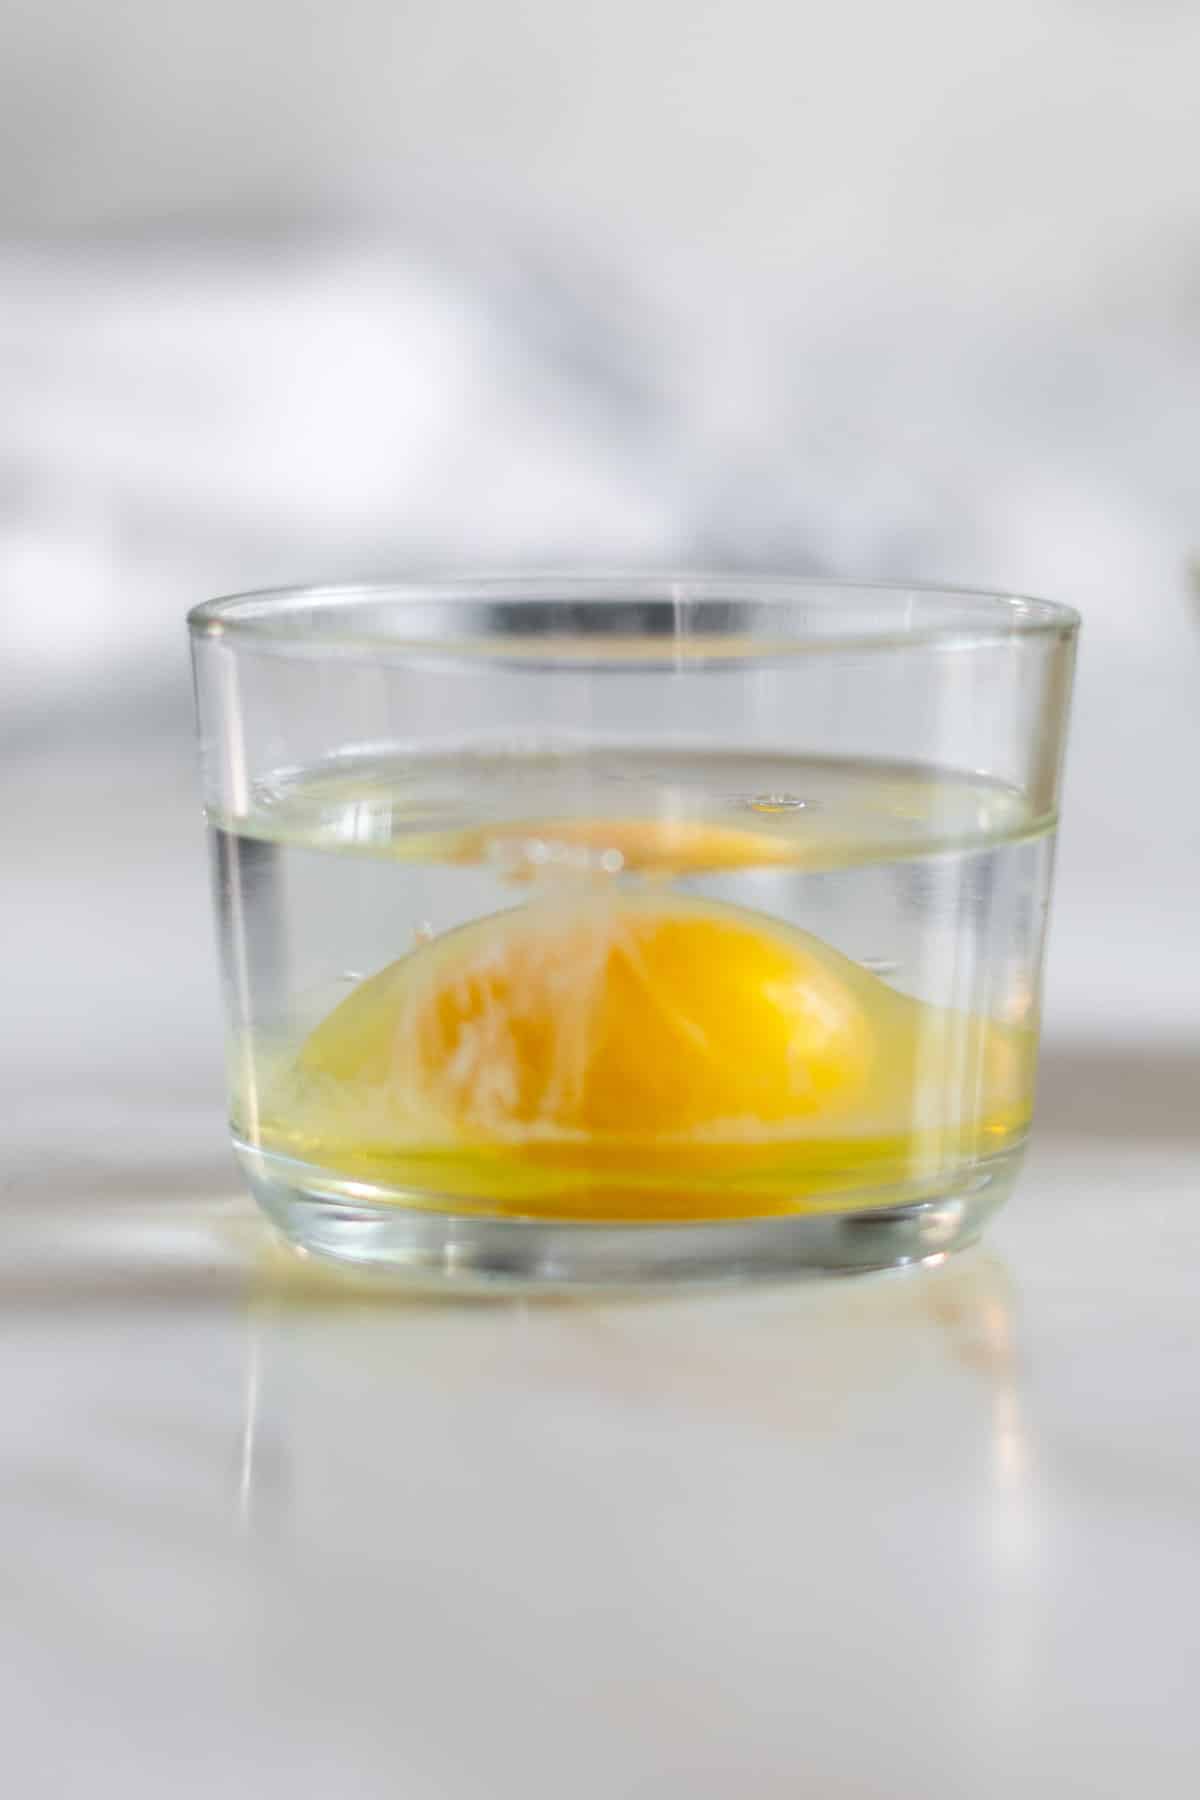 Raw egg in glass bowl with 1 inch of water.